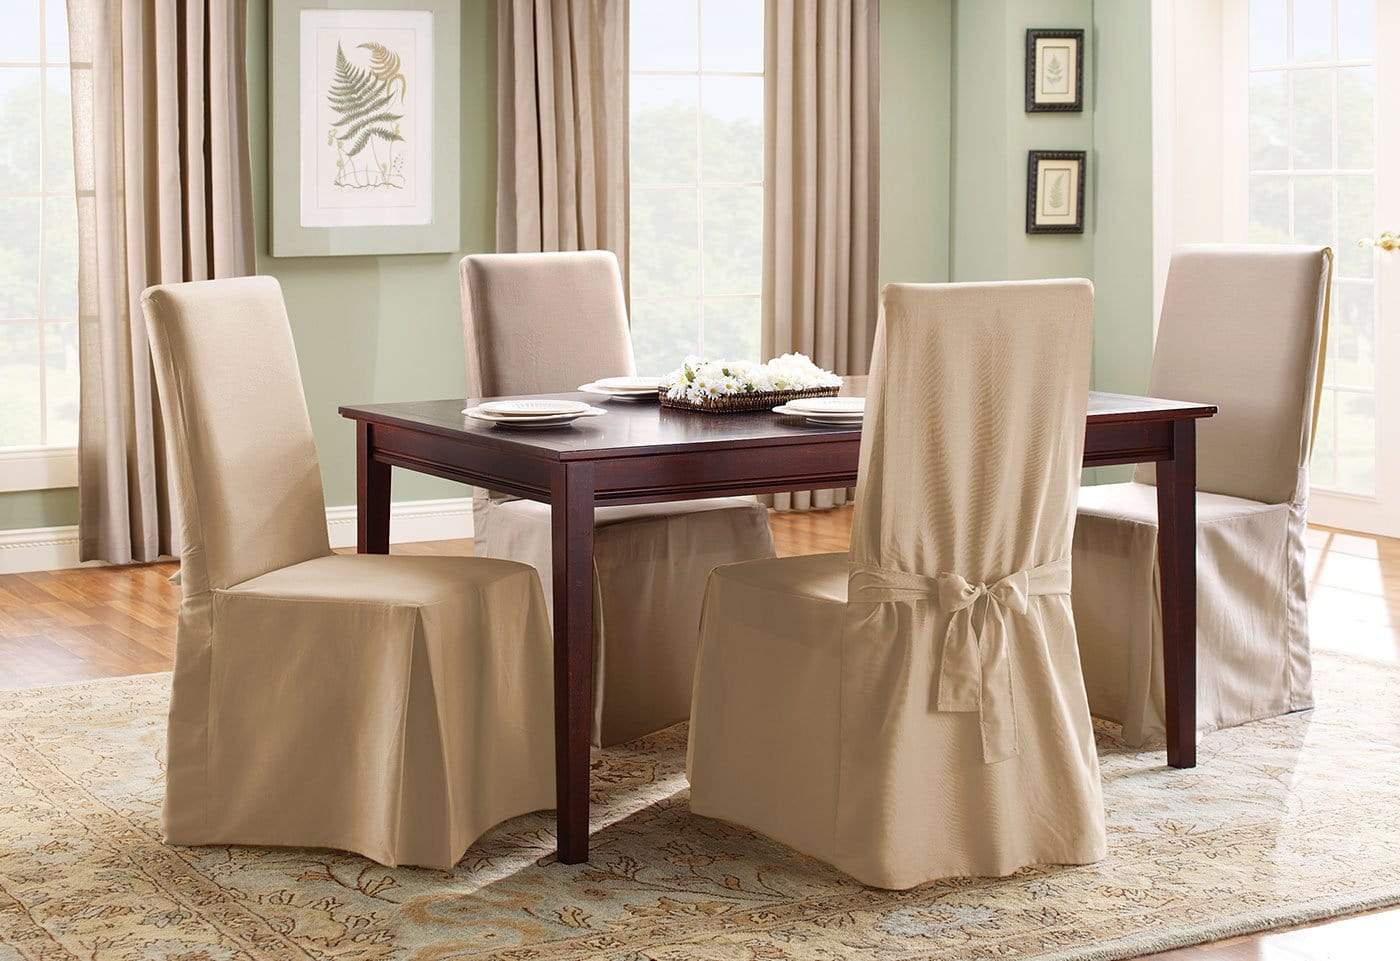 2 stores chair slipcover dinning table kitchen